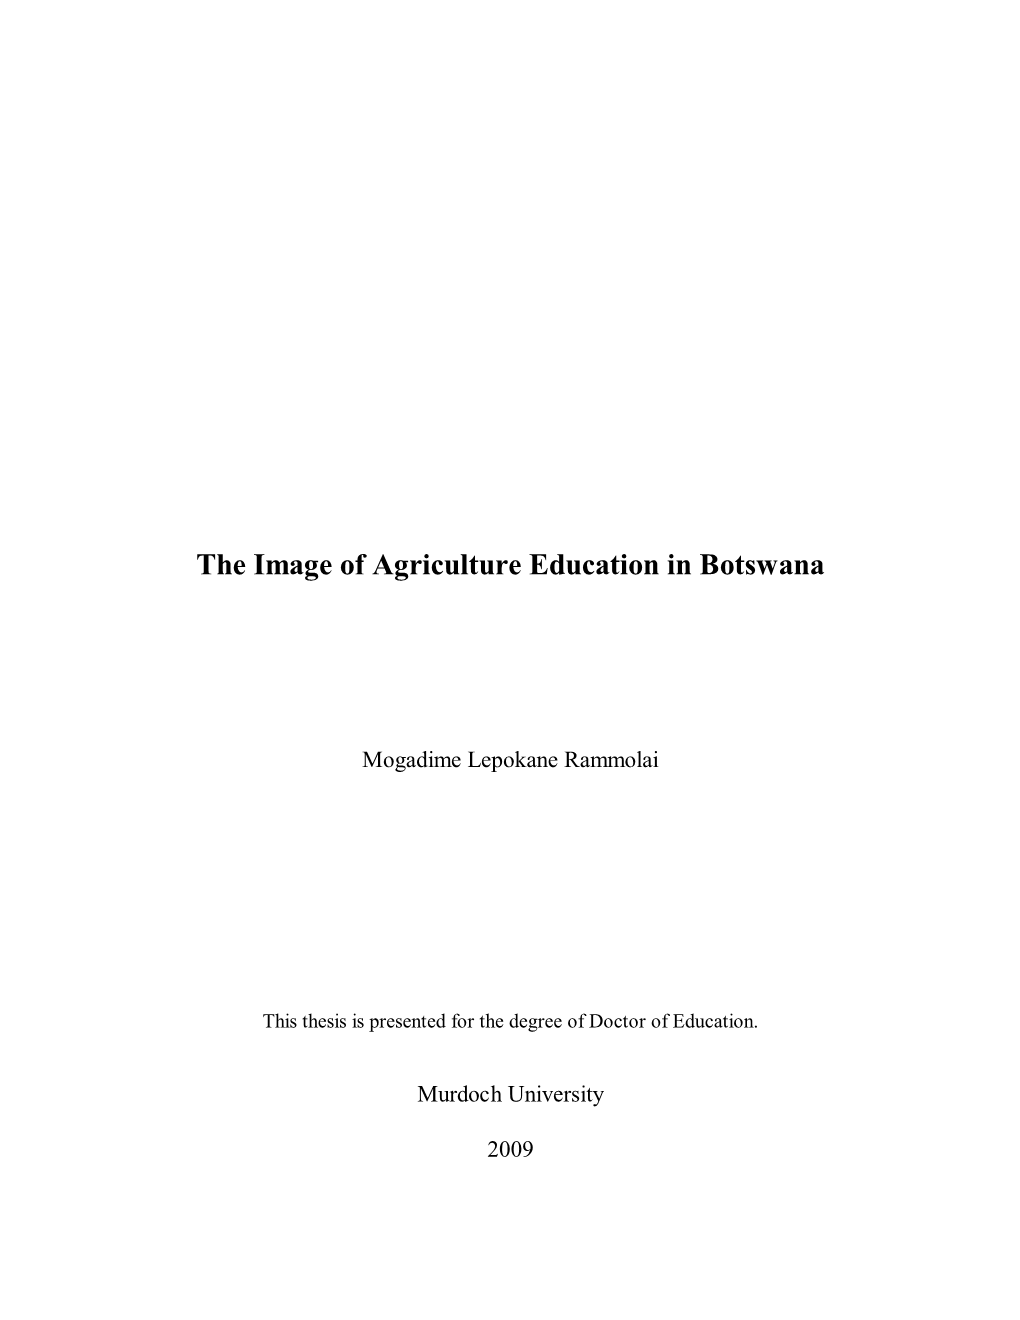 The Image of Agriculture Education in Botswana